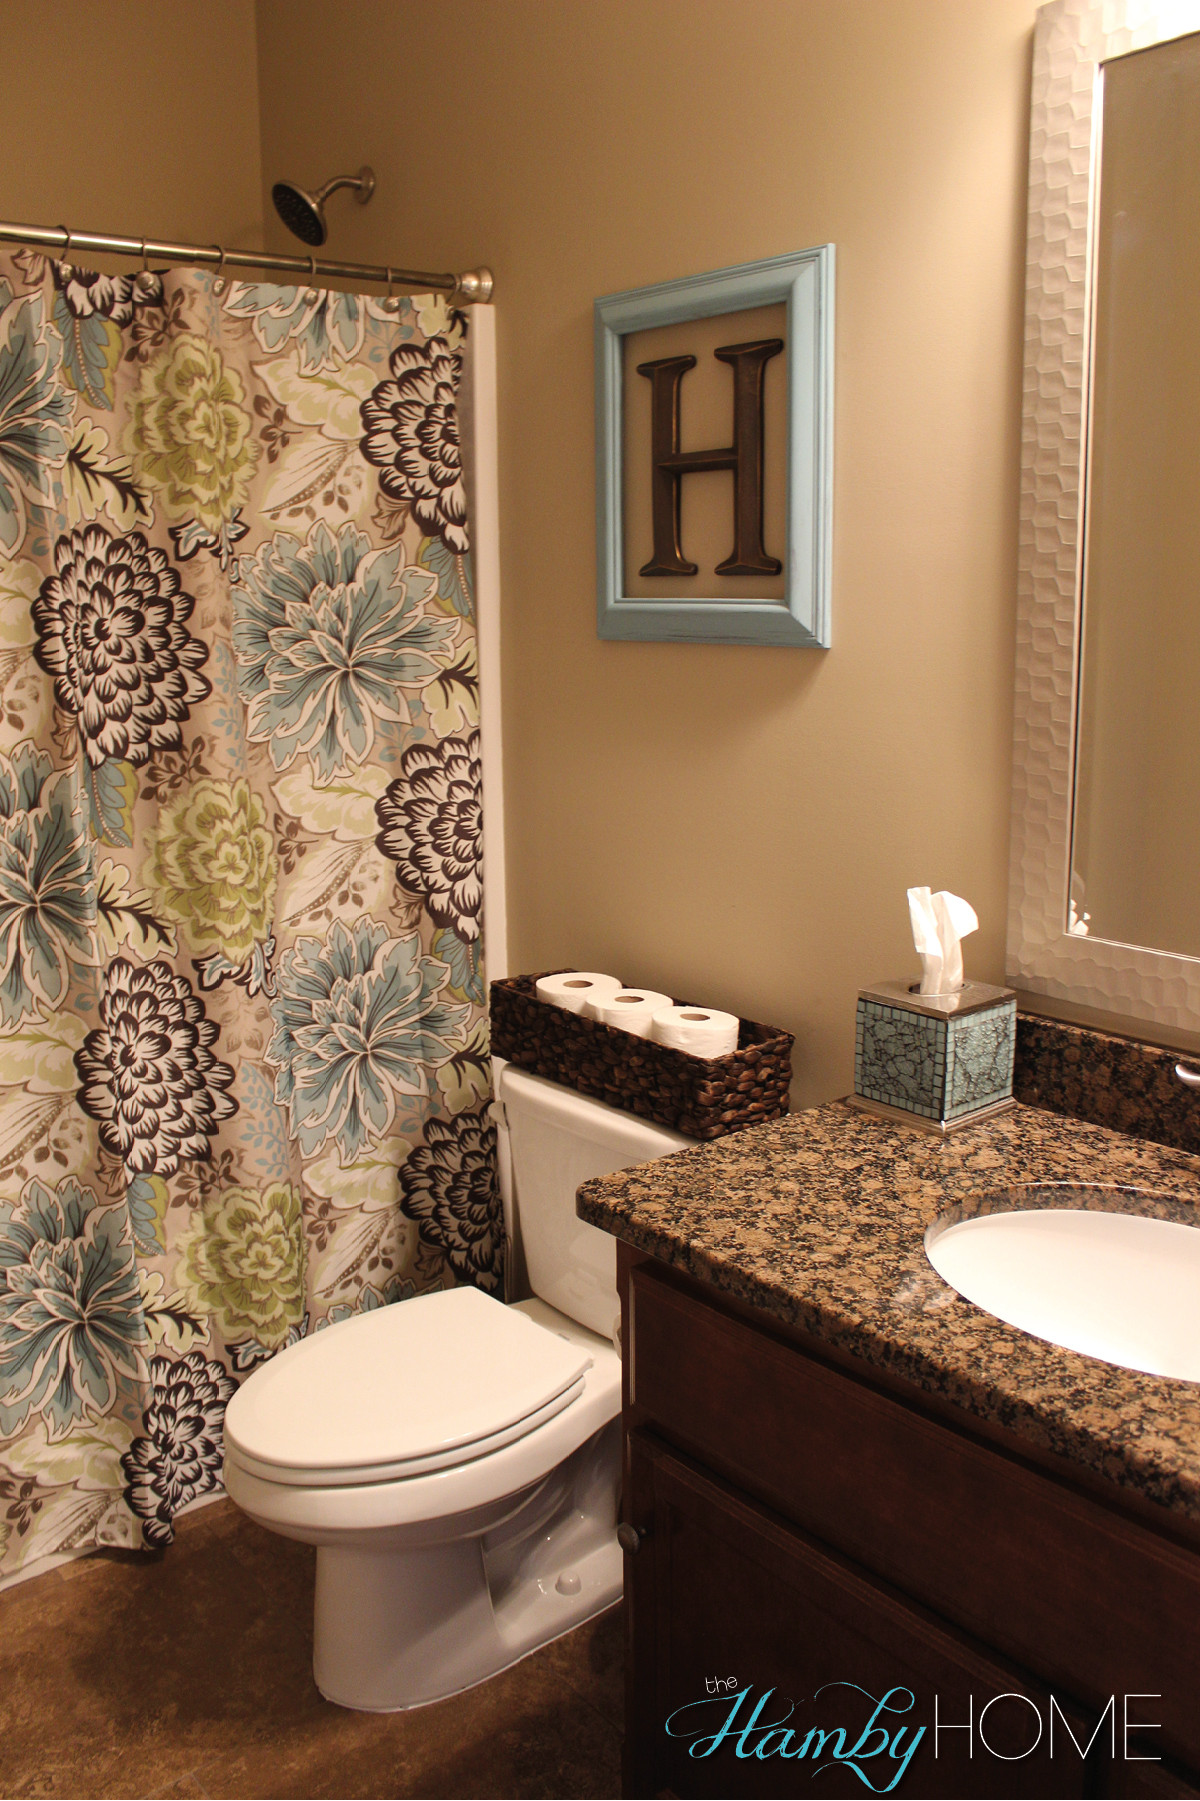 Guest Bathroom Decorations
 TGIF House Tour Guest Bathroom The Hamby Home